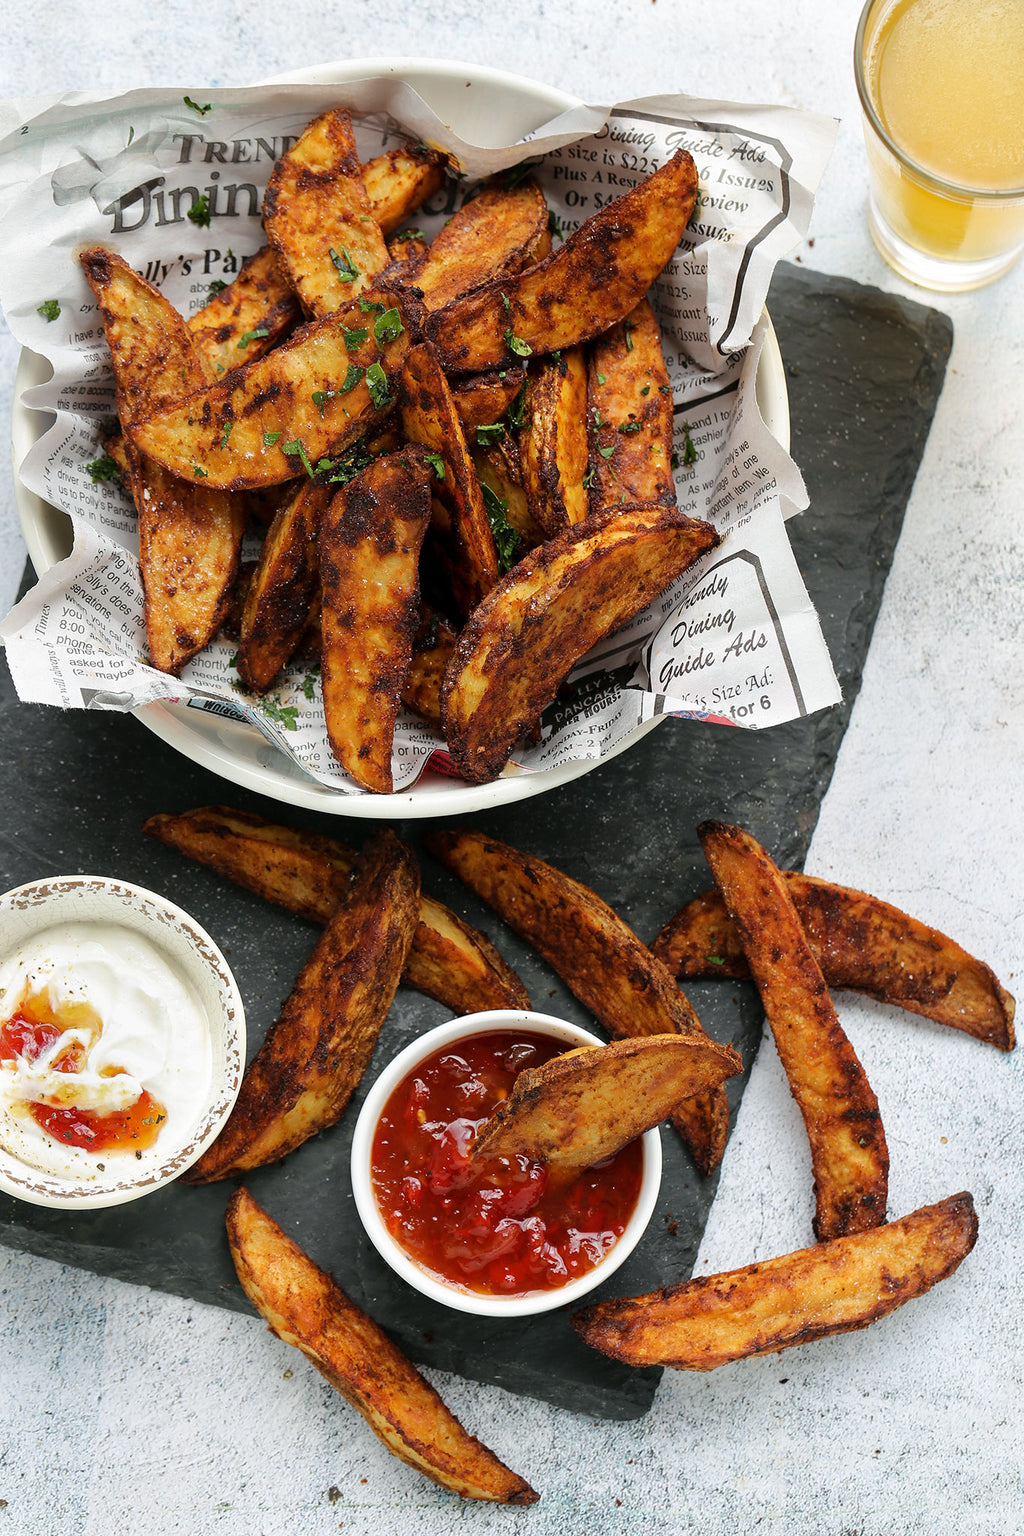 Potato Wedges with Sour Cream and Sweet Chili Dipping Sauce